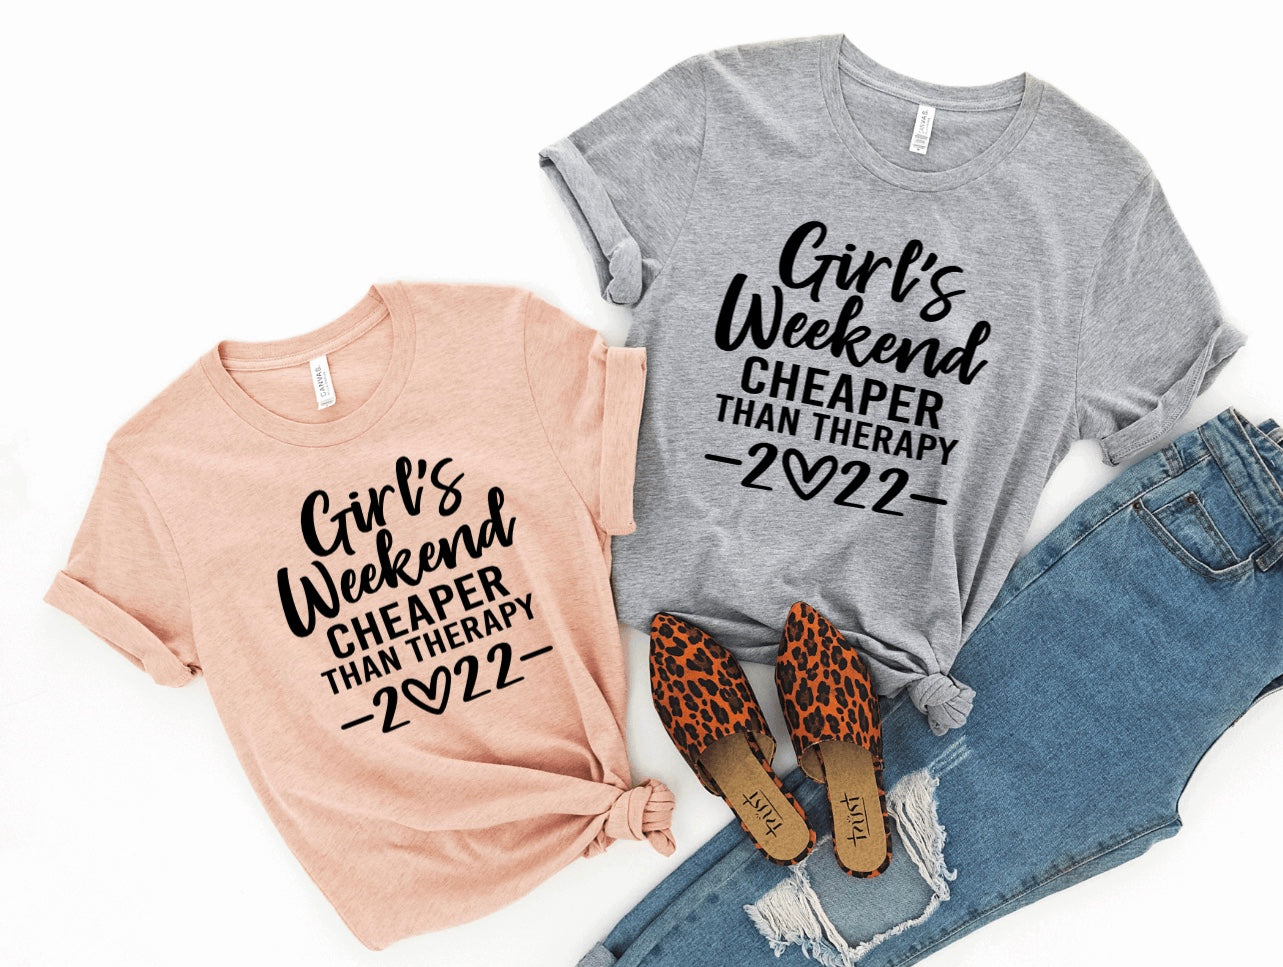 Girl’s Weekend Cheaper than Therapy 2022 t-shirt 